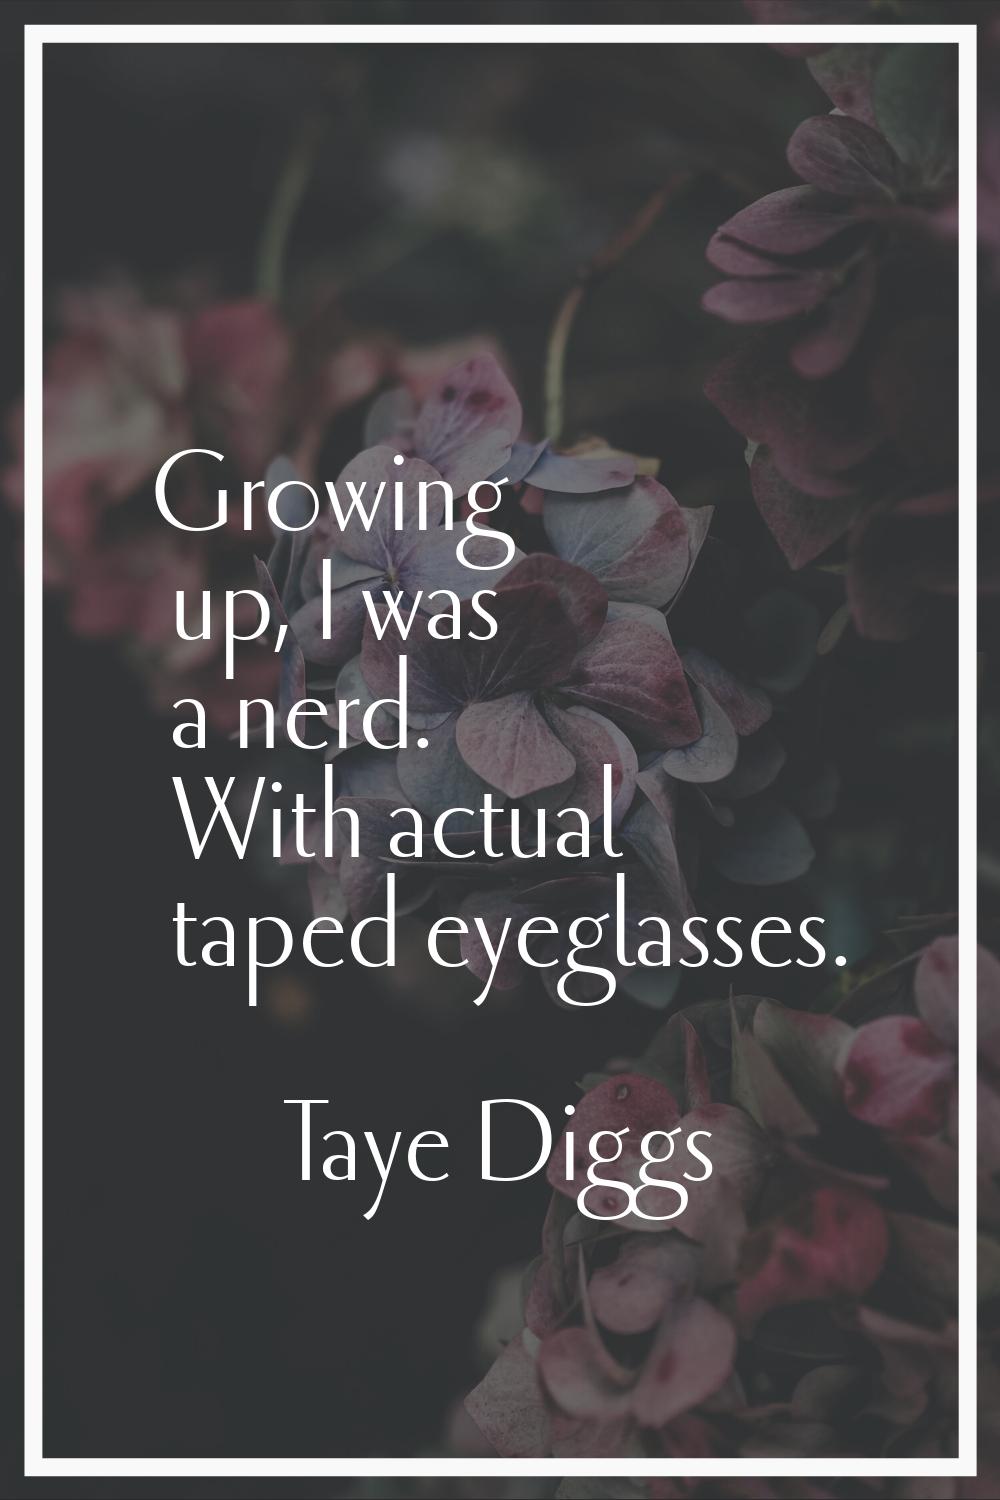 Growing up, I was a nerd. With actual taped eyeglasses.